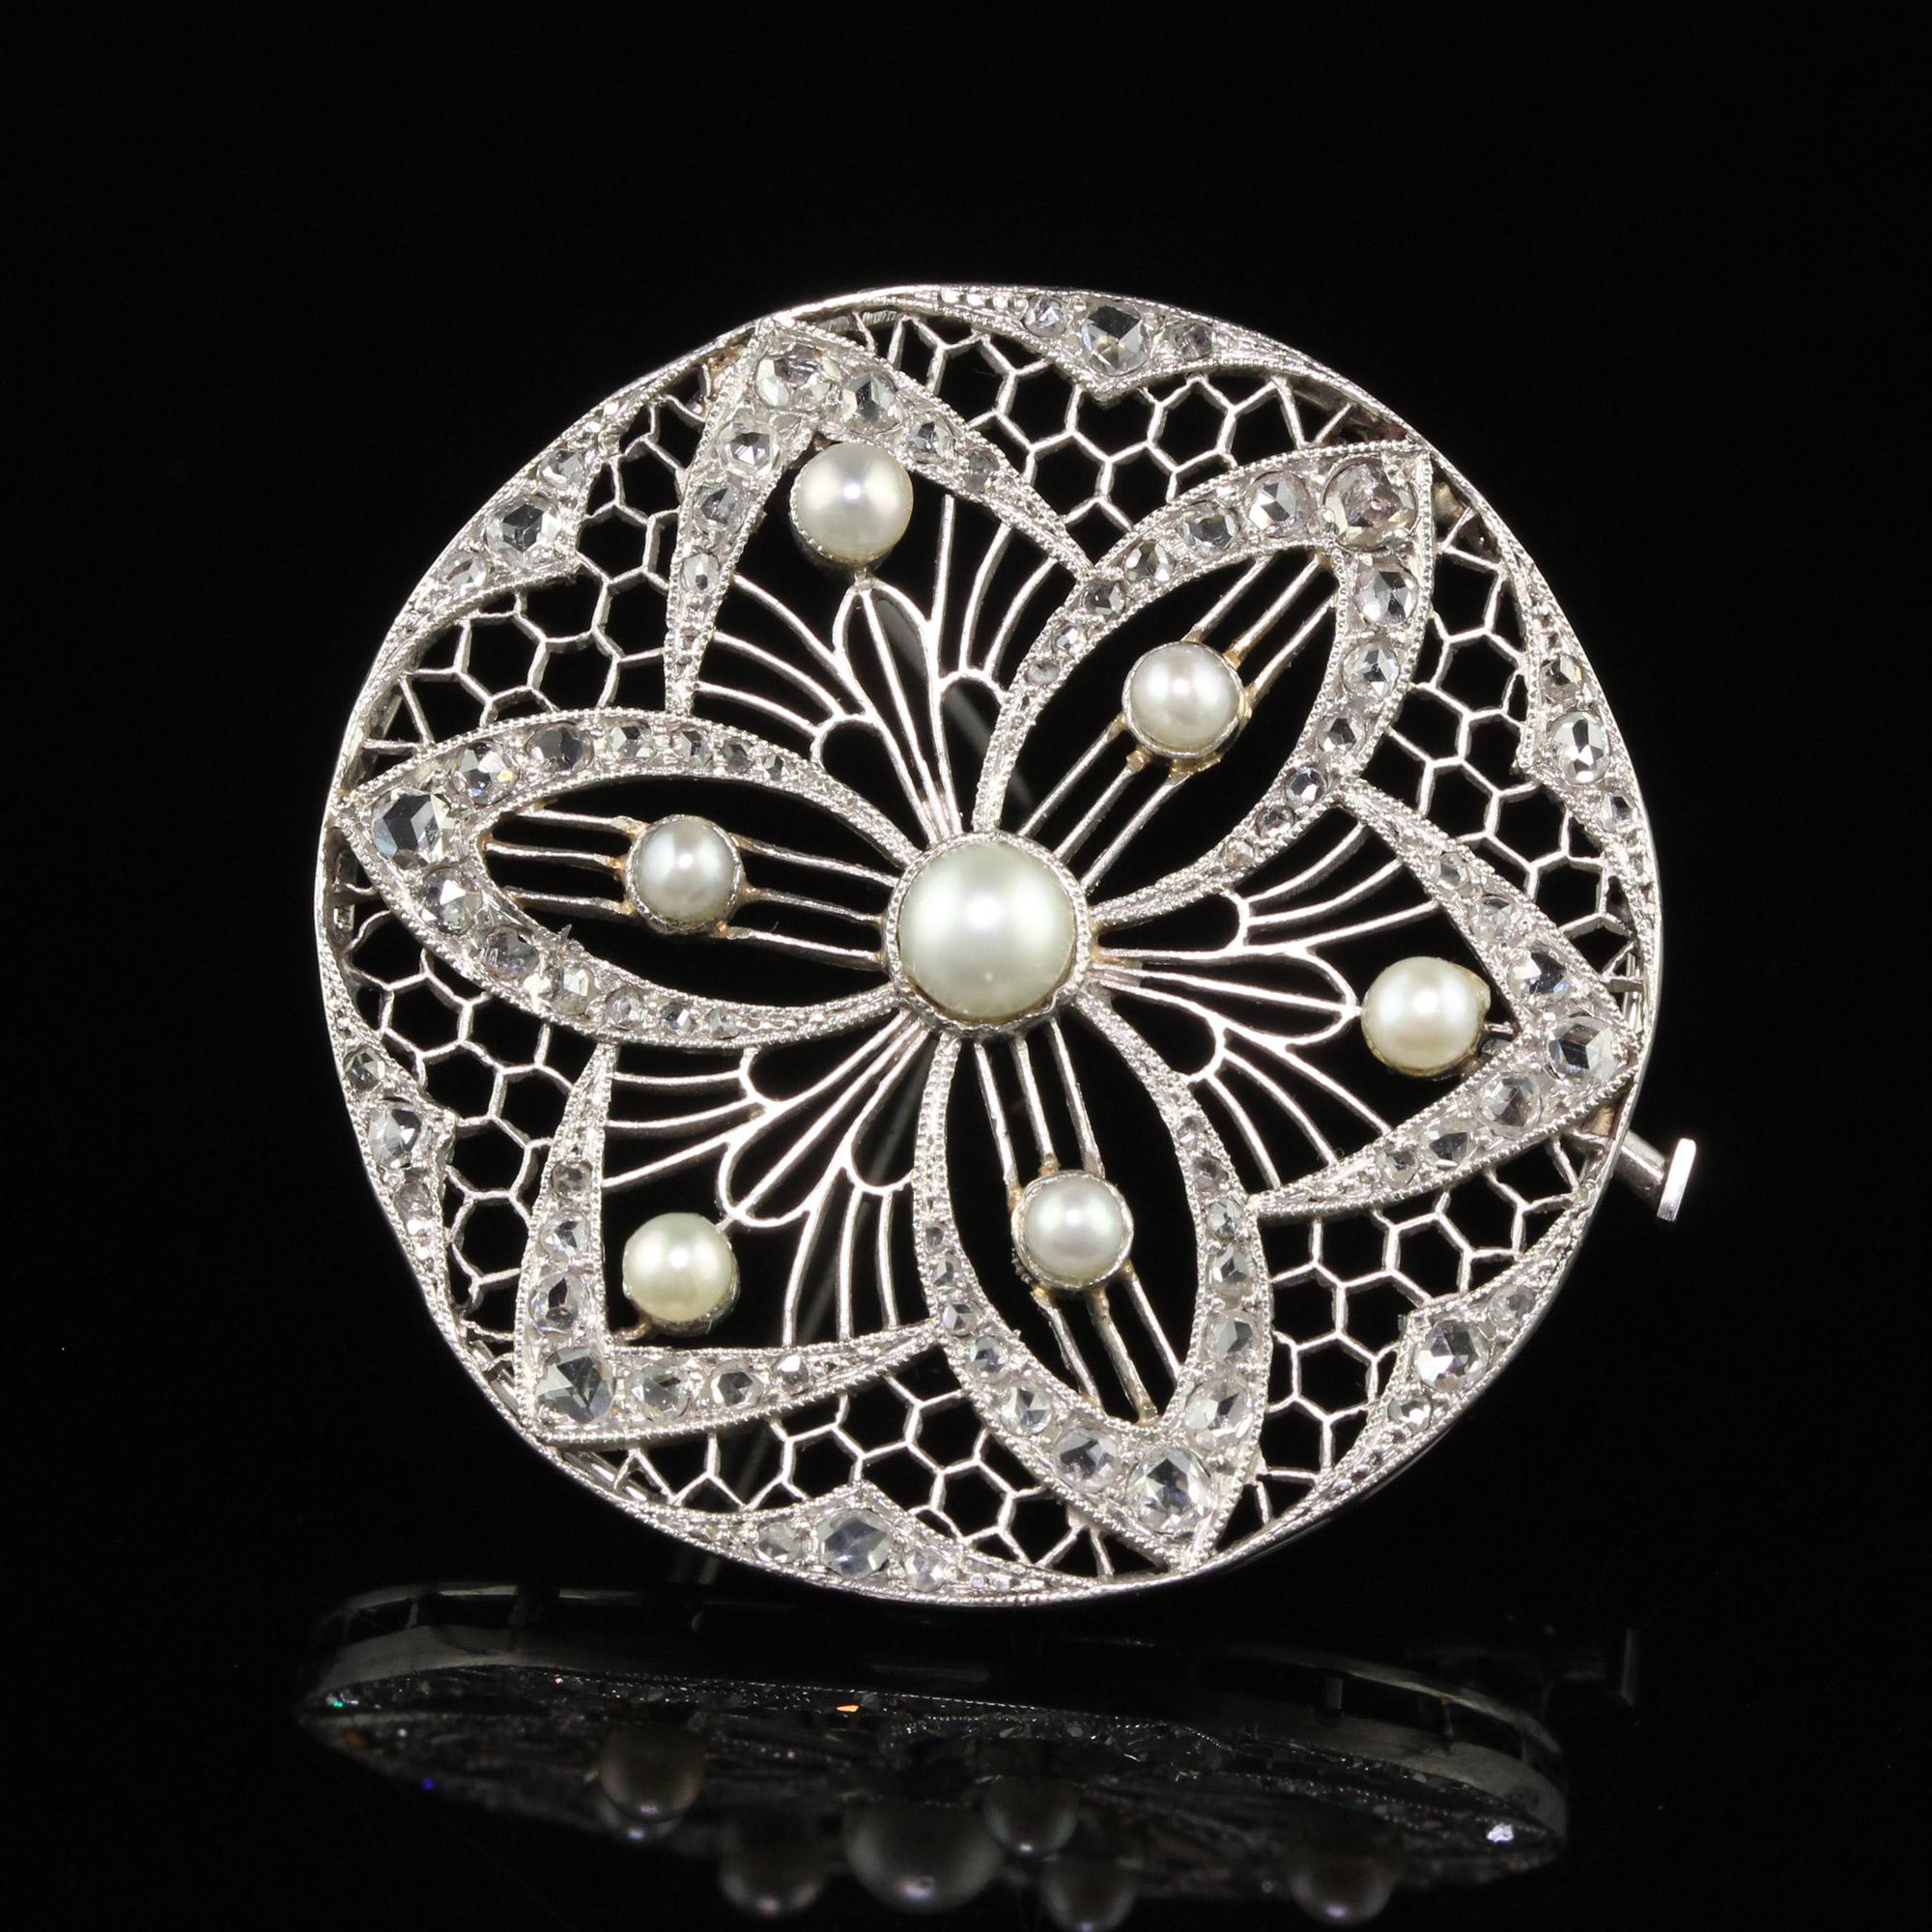 Antique Edwardian Platinum Diamond and Pearl Filigree Pin For Sale 1